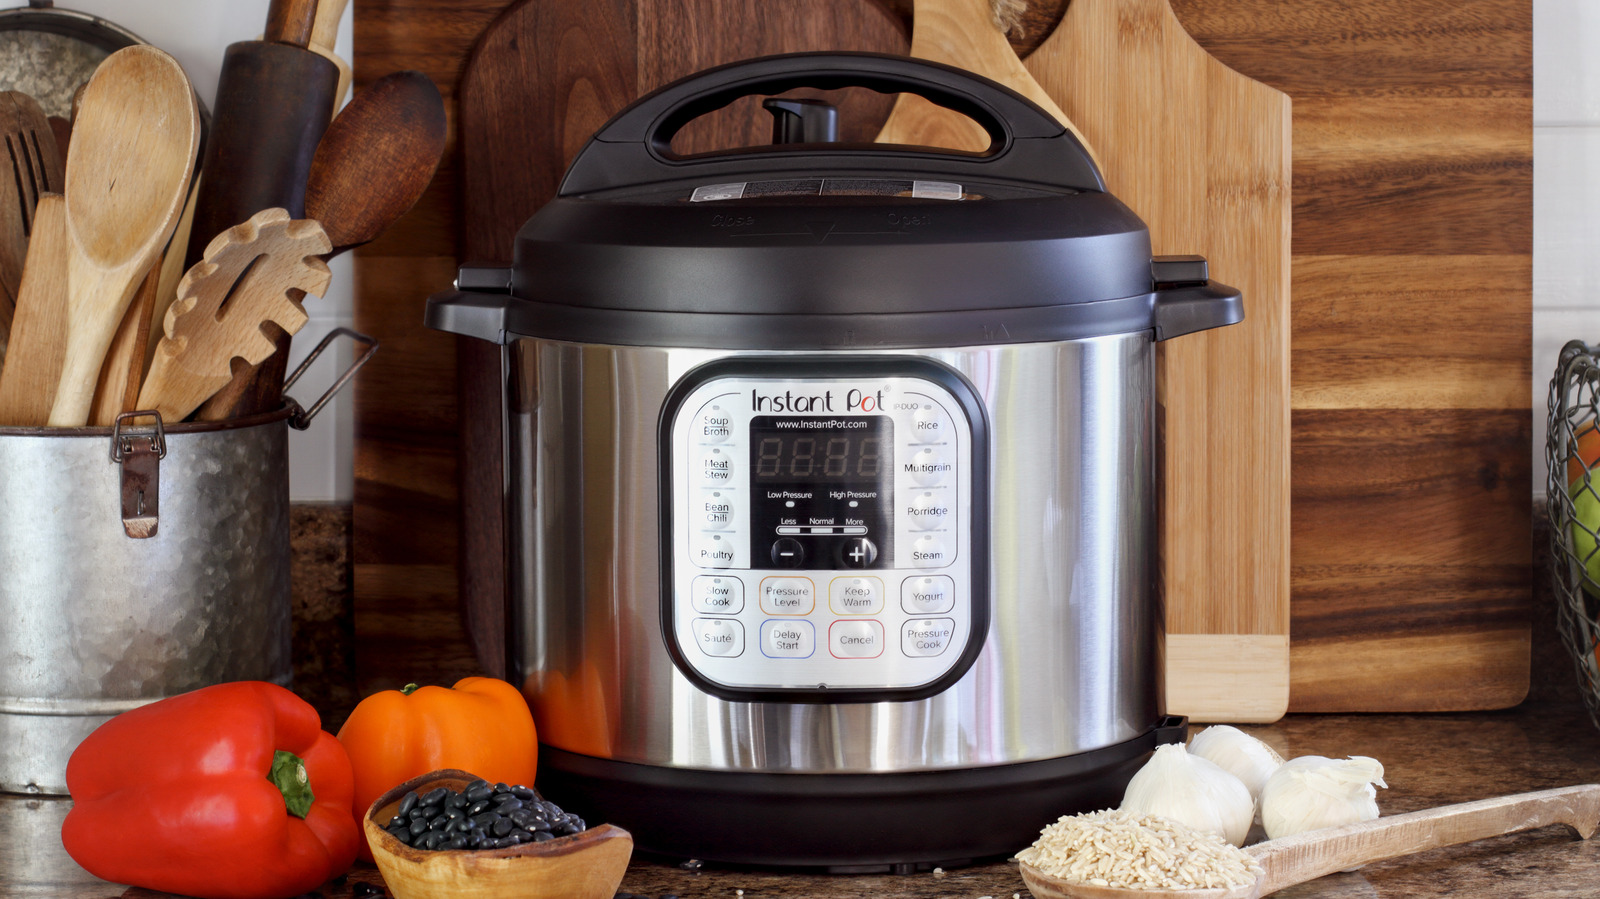 https://www.tastingtable.com/img/gallery/10-tips-you-need-when-cooking-with-an-instant-pot/l-intro-1654119308.jpg